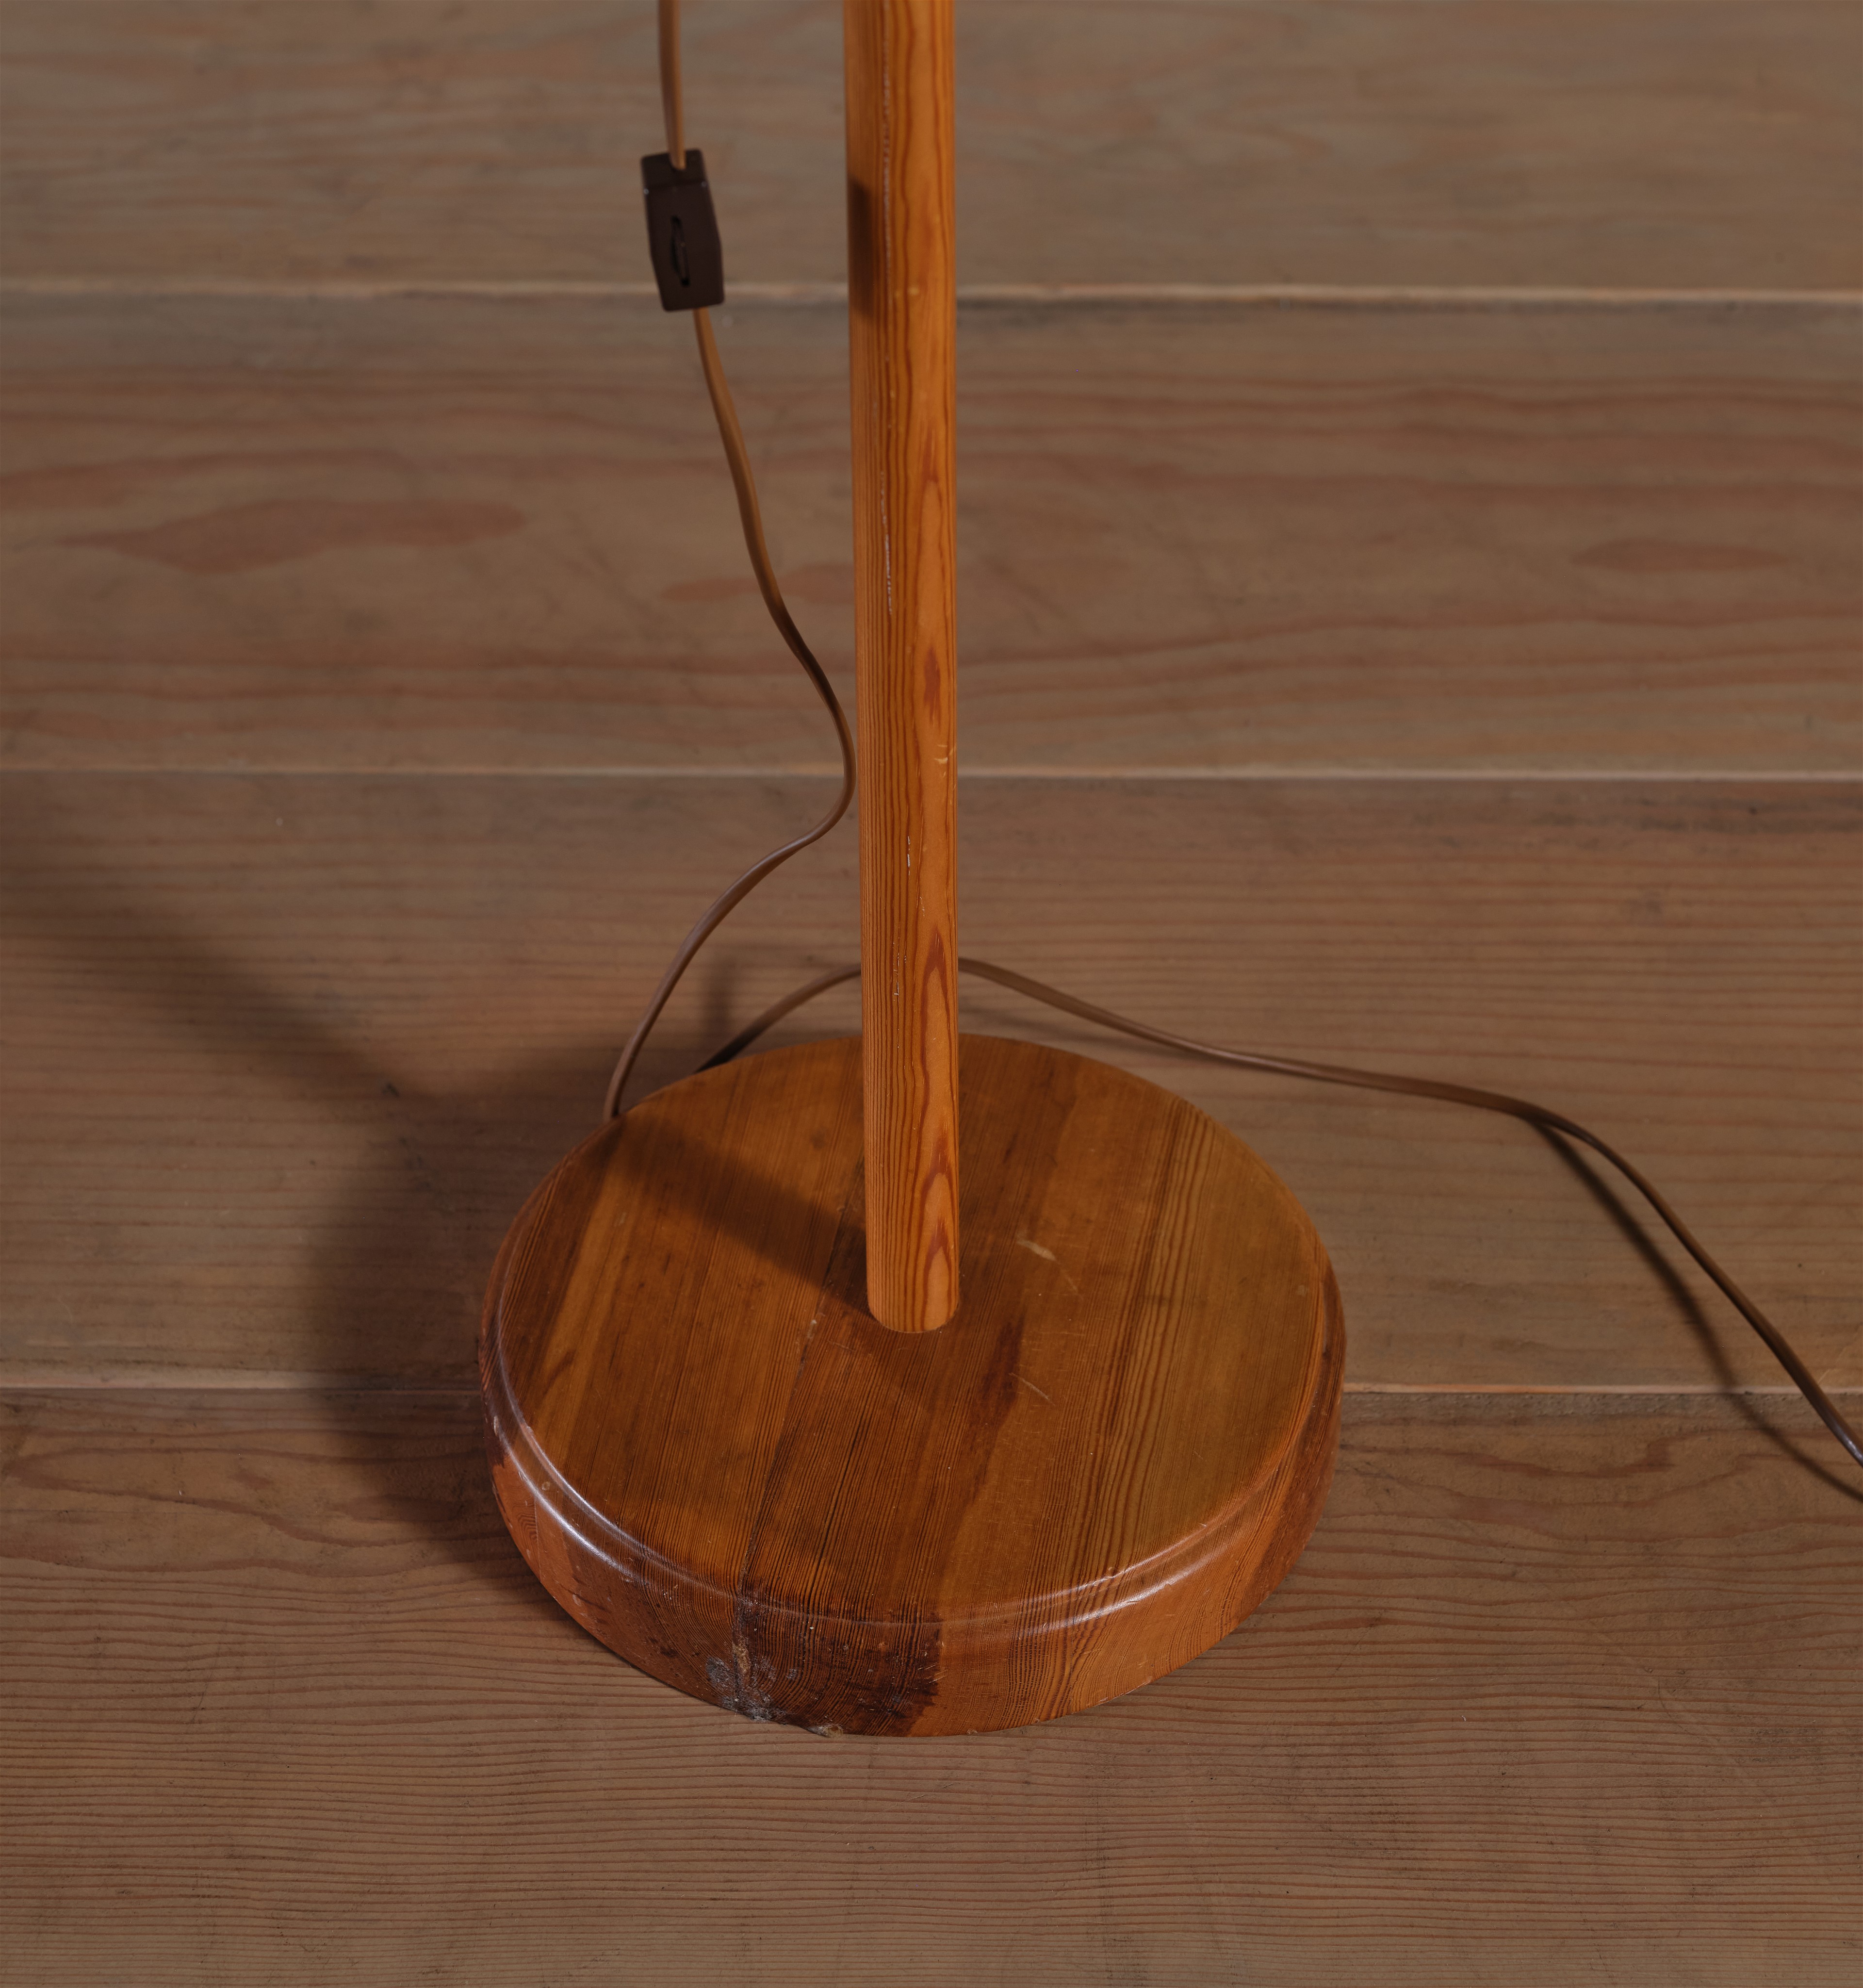 a wooden table lamp on a wooden floor